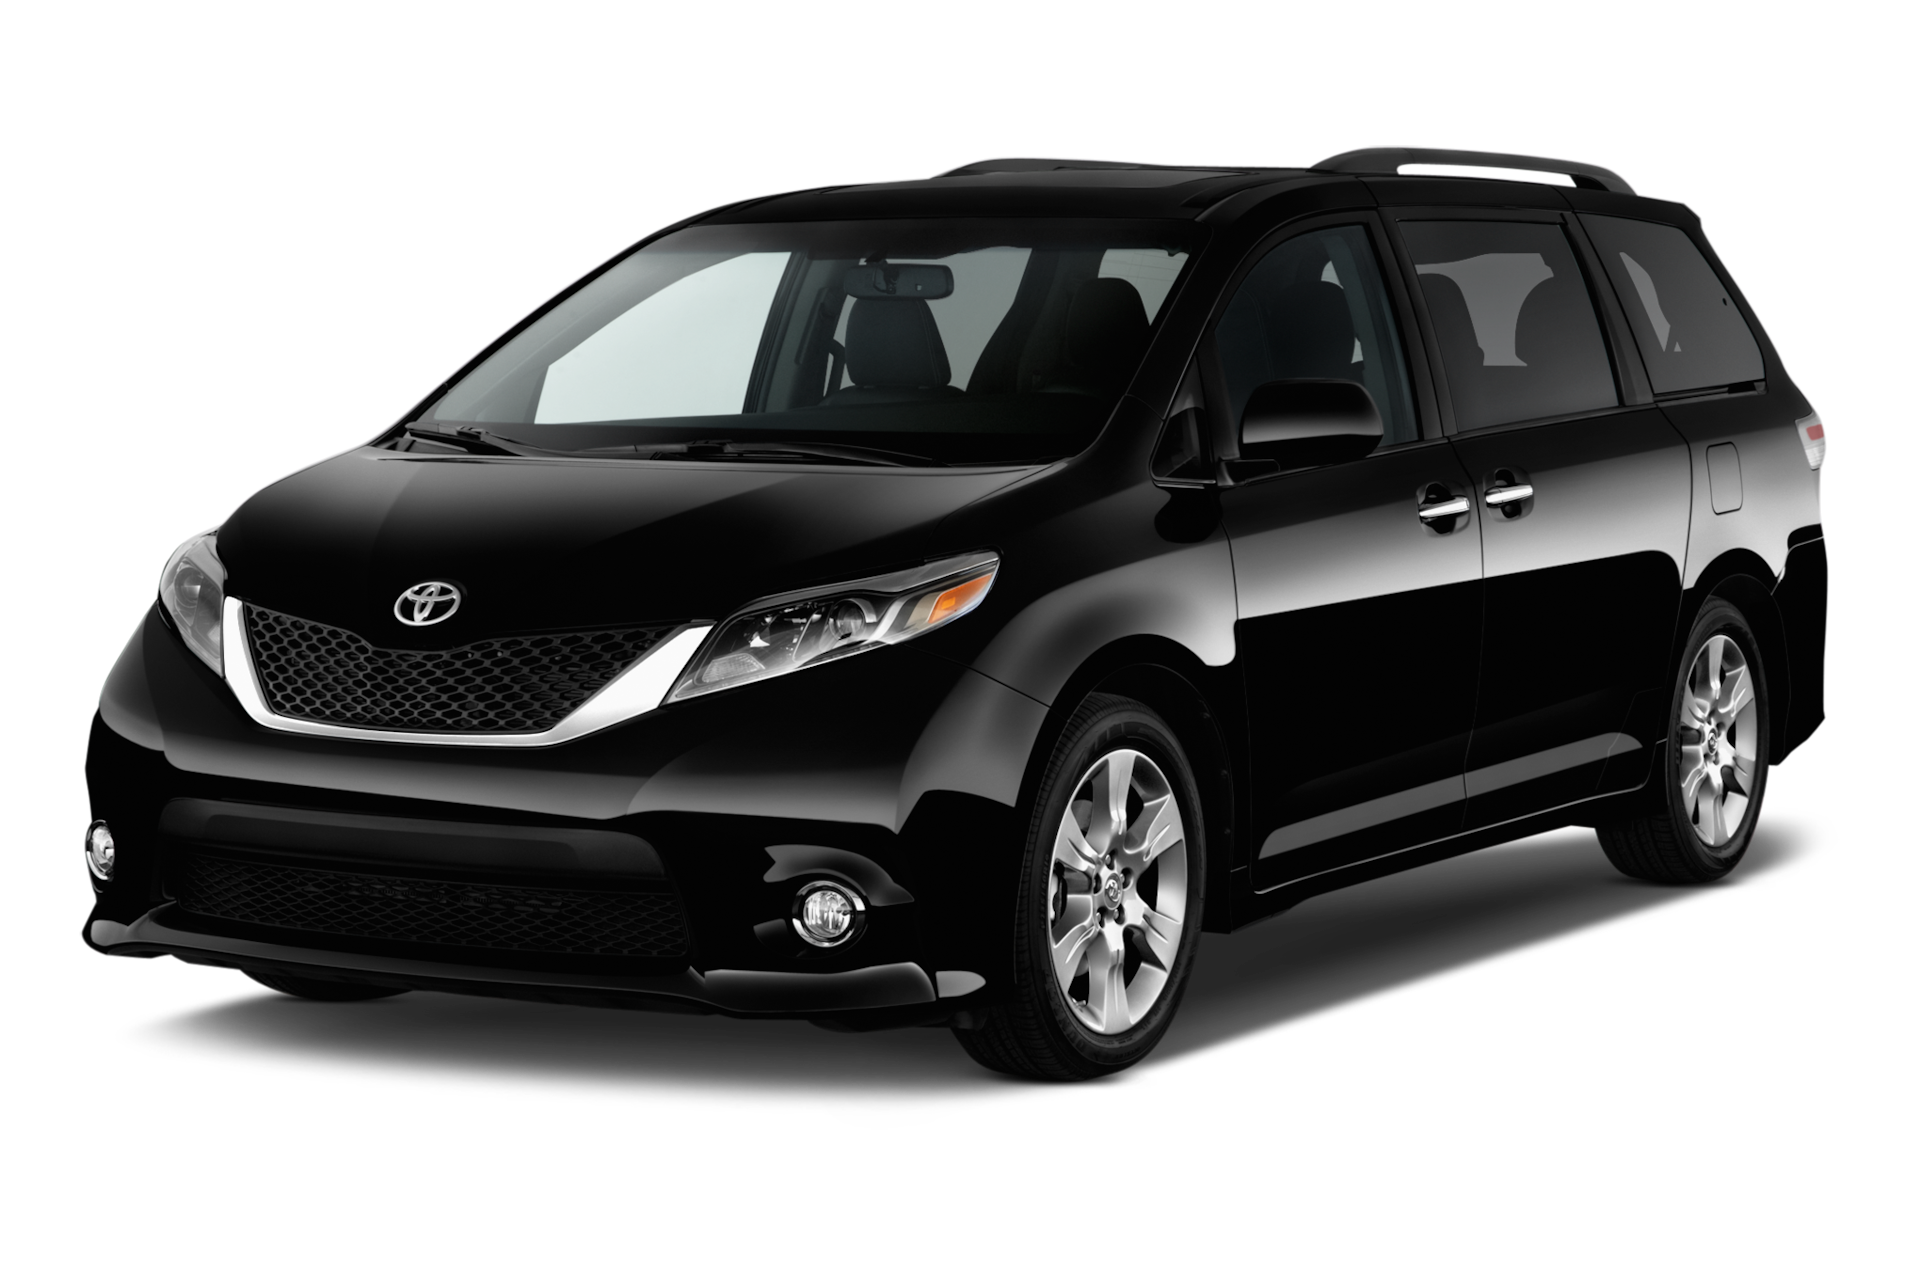 2017 Toyota Sienna Prices, Reviews, and Photos - MotorTrend